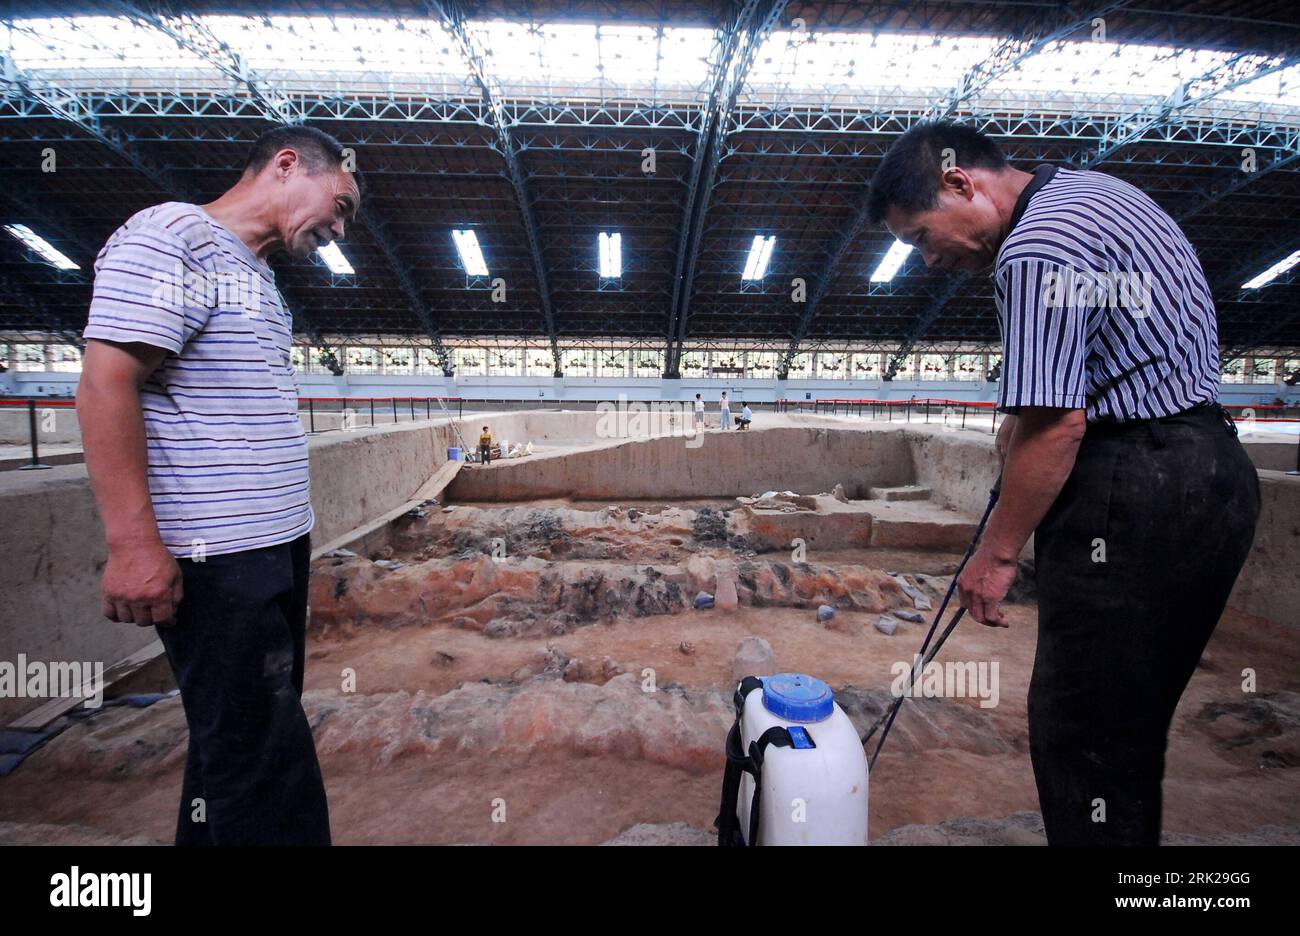 Bildnummer: 53154343  Datum: 11.06.2009  Copyright: imago/Xinhua  Two archaeological workers make preparations for a deliberately-planned excavation of Pit No. 1 of Emperor Qingshihuangdi Terra Cotta Army in Xi an, capital of northwest China s Shaanxi Province, June 10, 2009.  kbdig   Zwei Archäologische Arbeiter Make Vorbereitung für einer deliberately-planned Ausgrabungsstätte of Grube No. 1 of Kaiser Qingshihuangdi TerraCotta Armee, Archäologe, Archäologie, Wissenschaft quer    Image number 53154343 Date 11 06 2009 Copyright Imago XINHUA Two Archaeological Workers Make preparations for a de Stock Photo